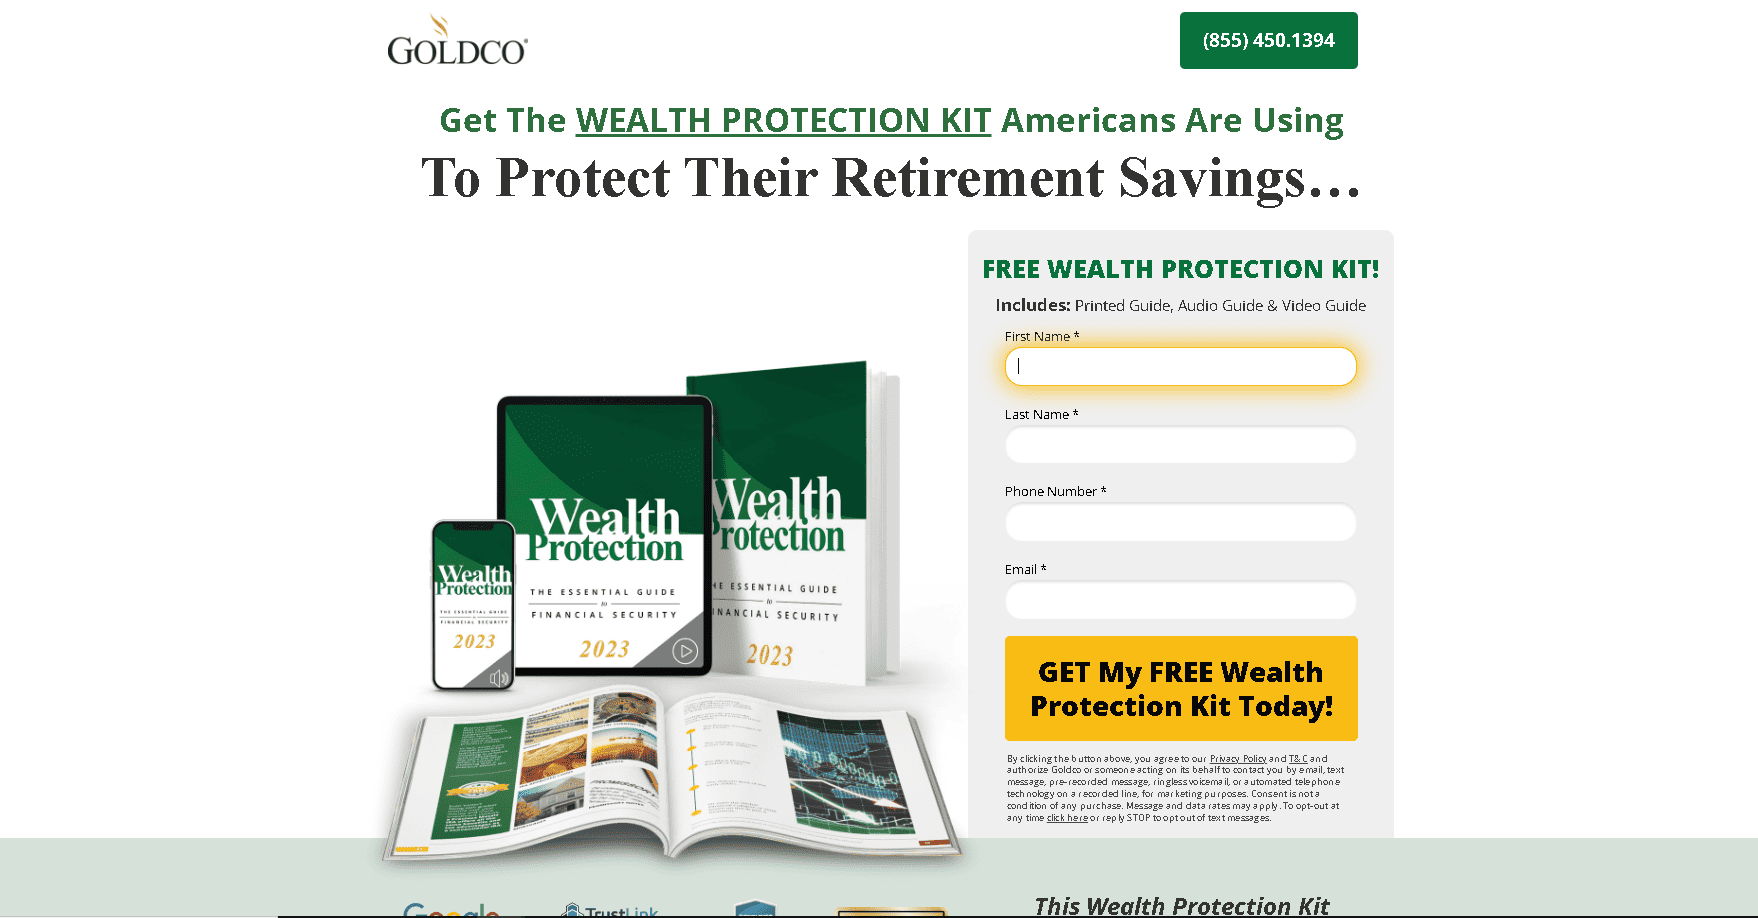 Goldco silver IRA firm wealth protection kit